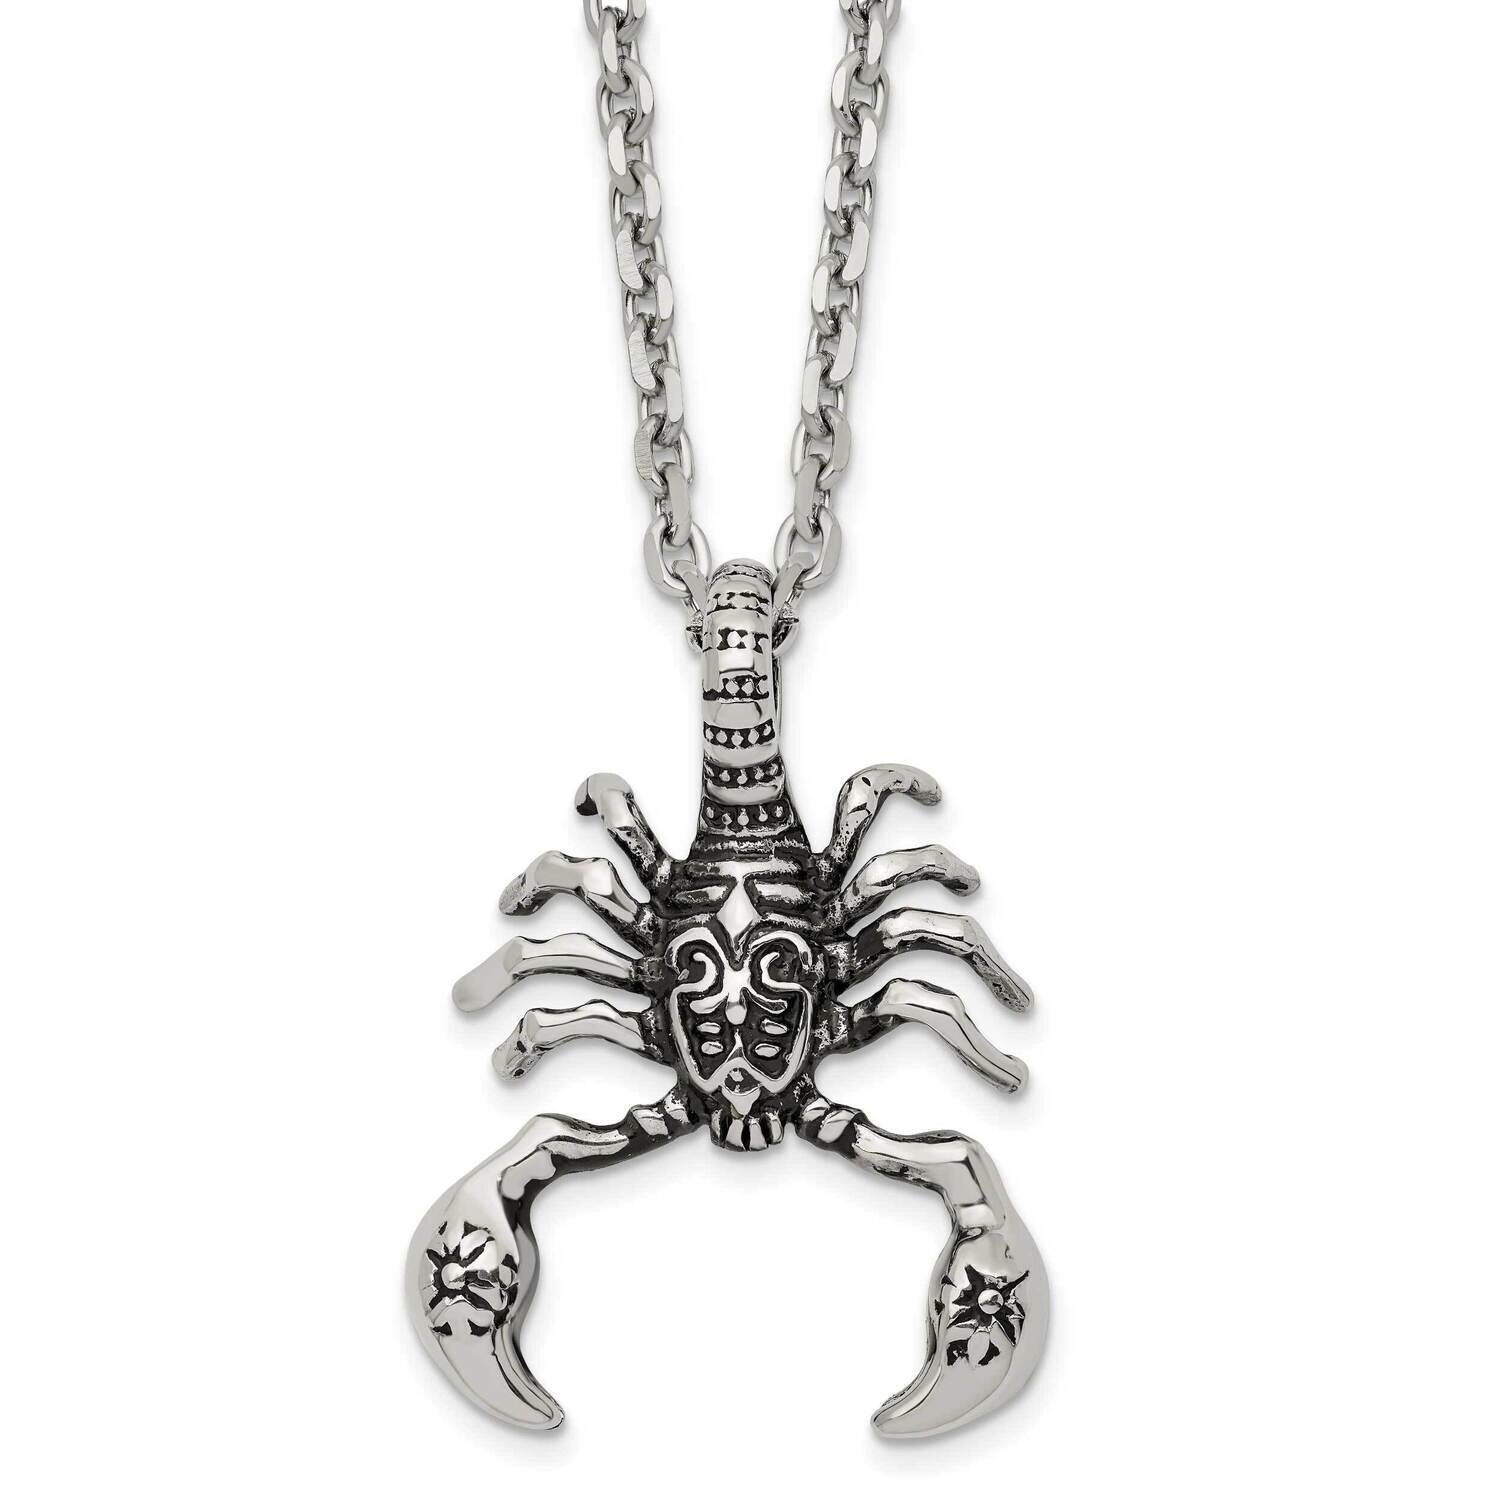 Antiqued and Polished Scorpion 24 Inch Necklace Stainless Steel SRN2863-24